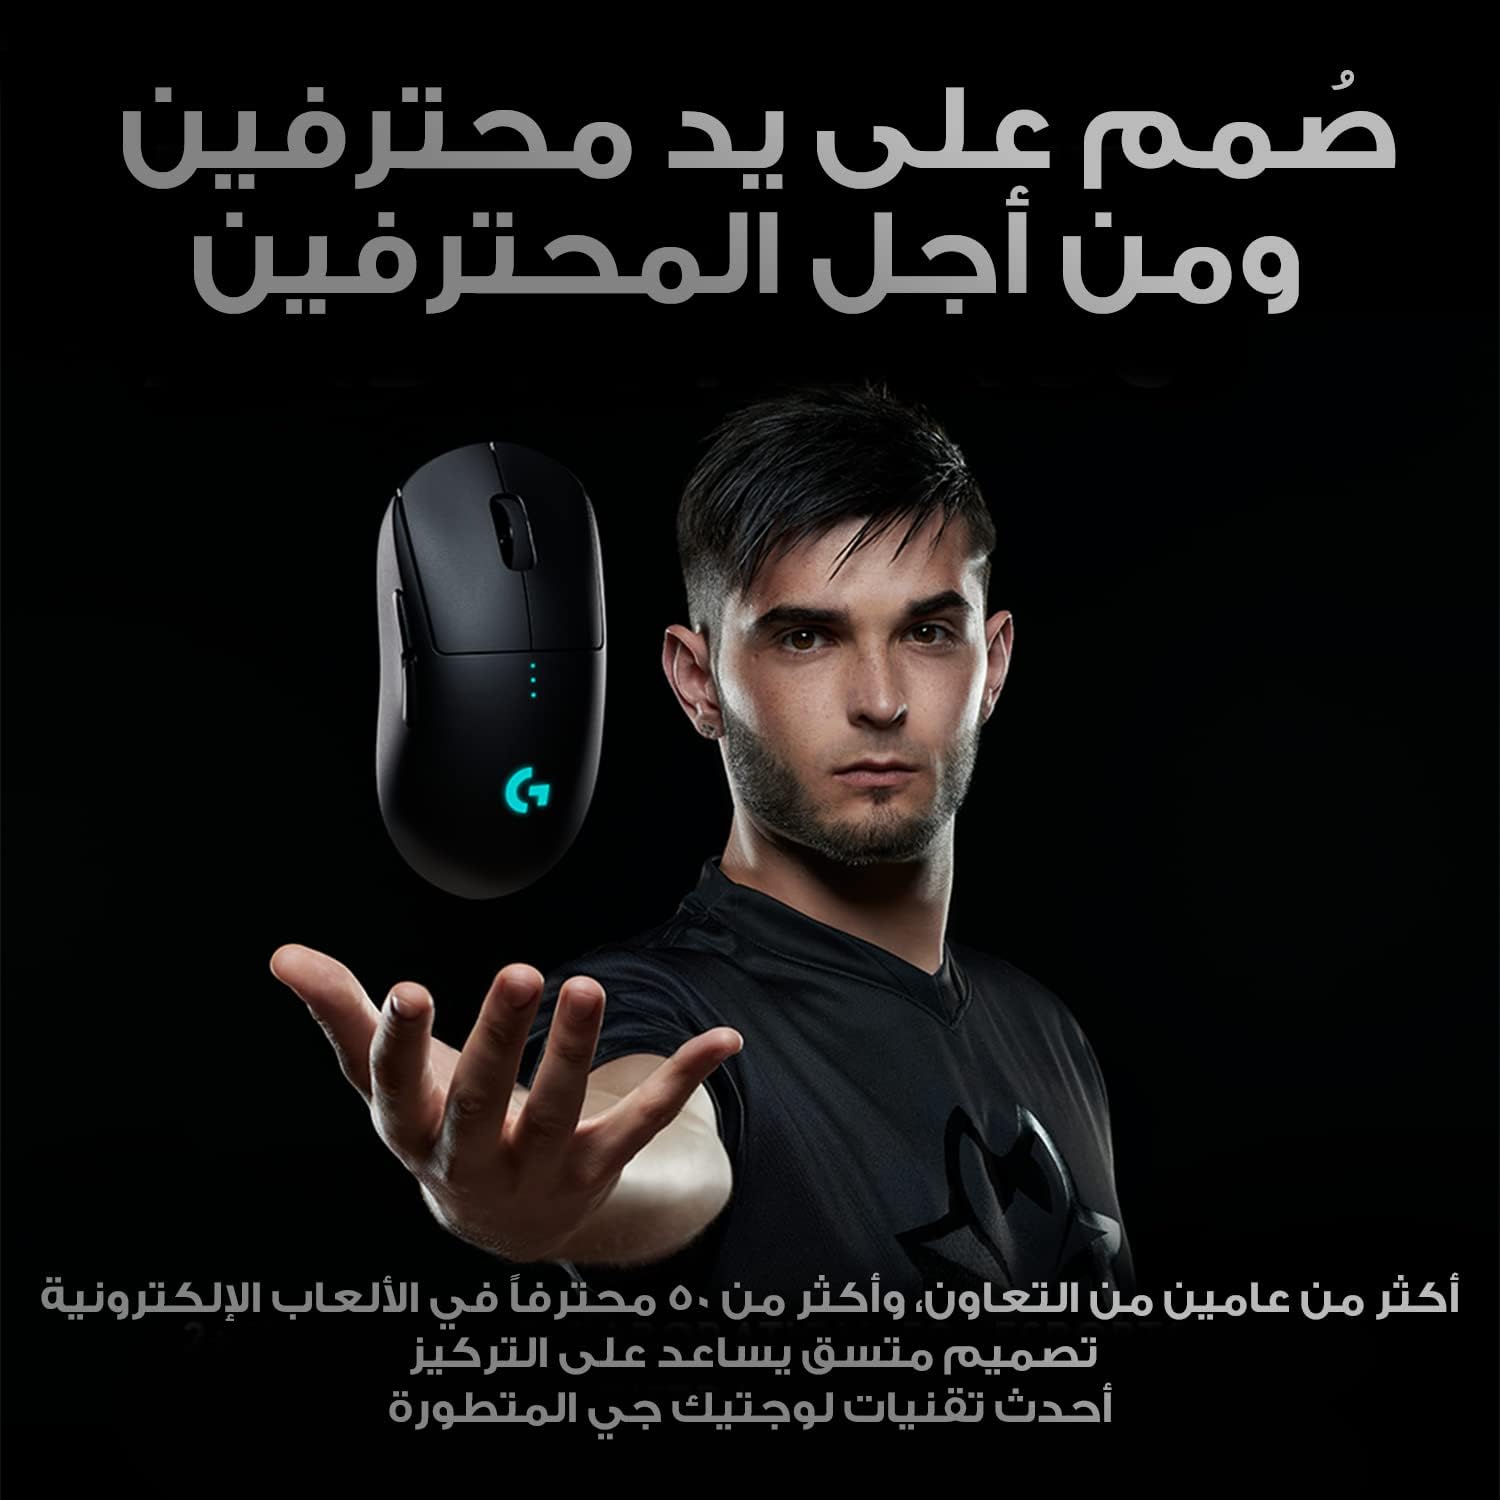 Logitech G203 Lightsync Gaming Mouse, 8000 Dpi, Customizable Buttons & Color Waves - Black